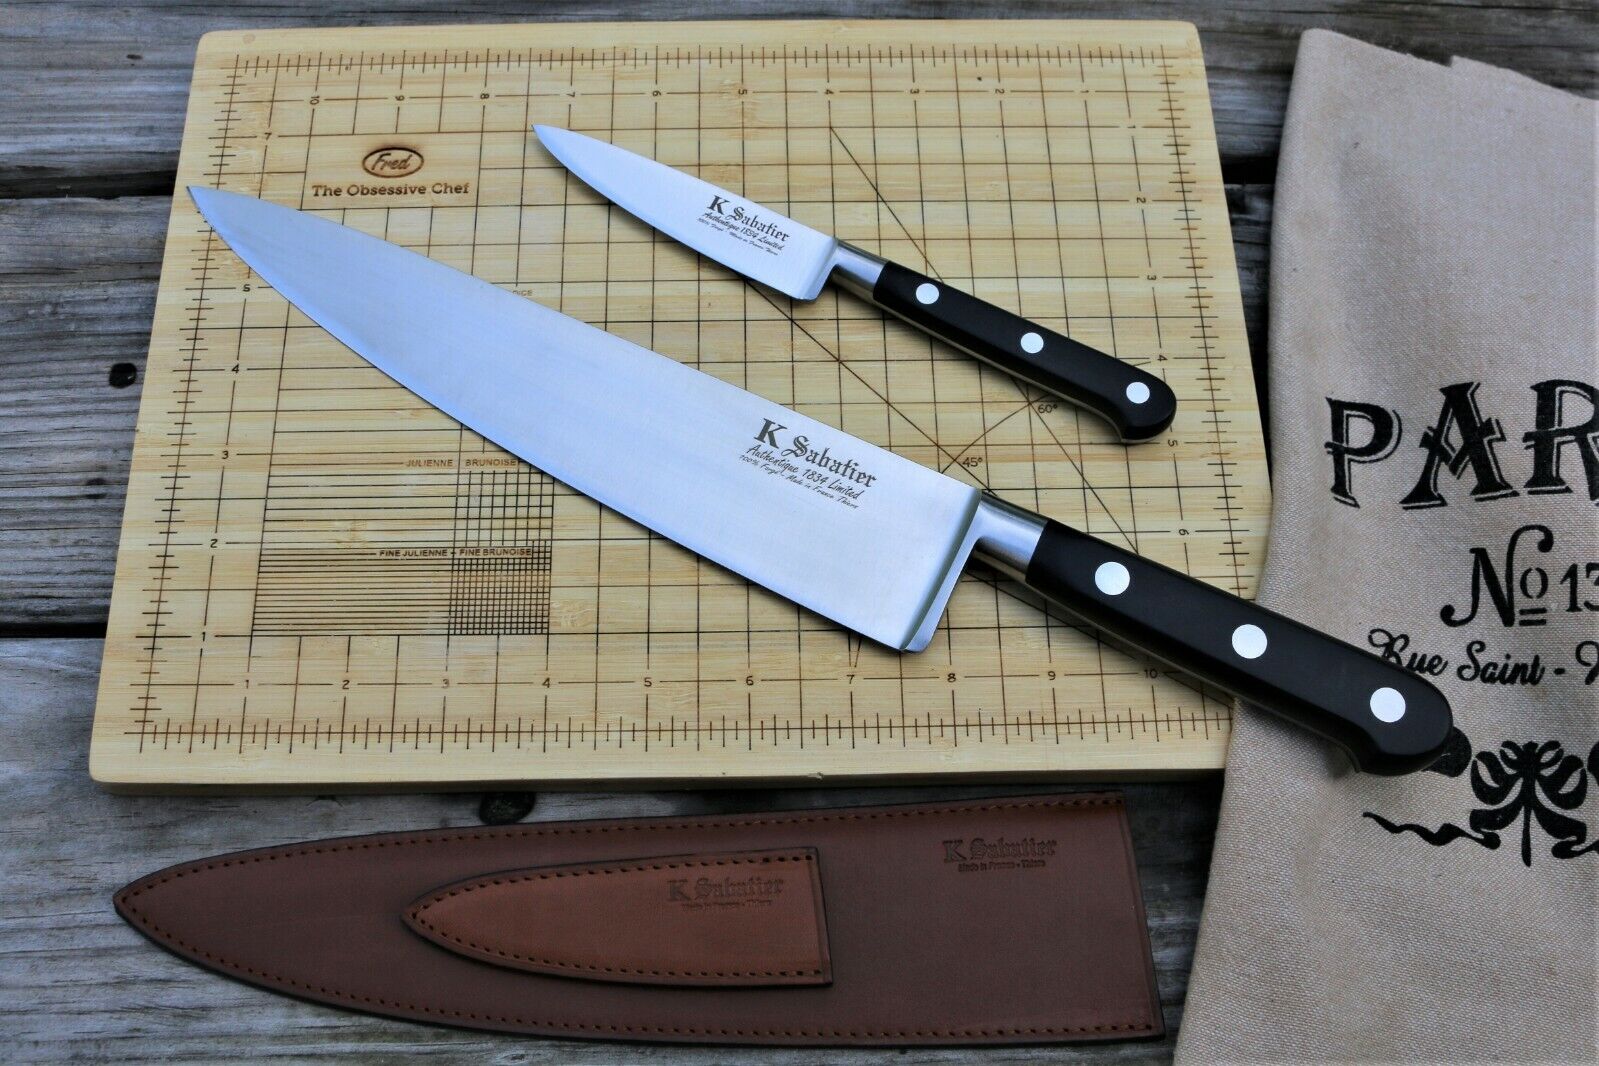 K SABATIER LIMITED EDITION , 1834 Authentique , 10 inch Chef and 4 inch Paring .